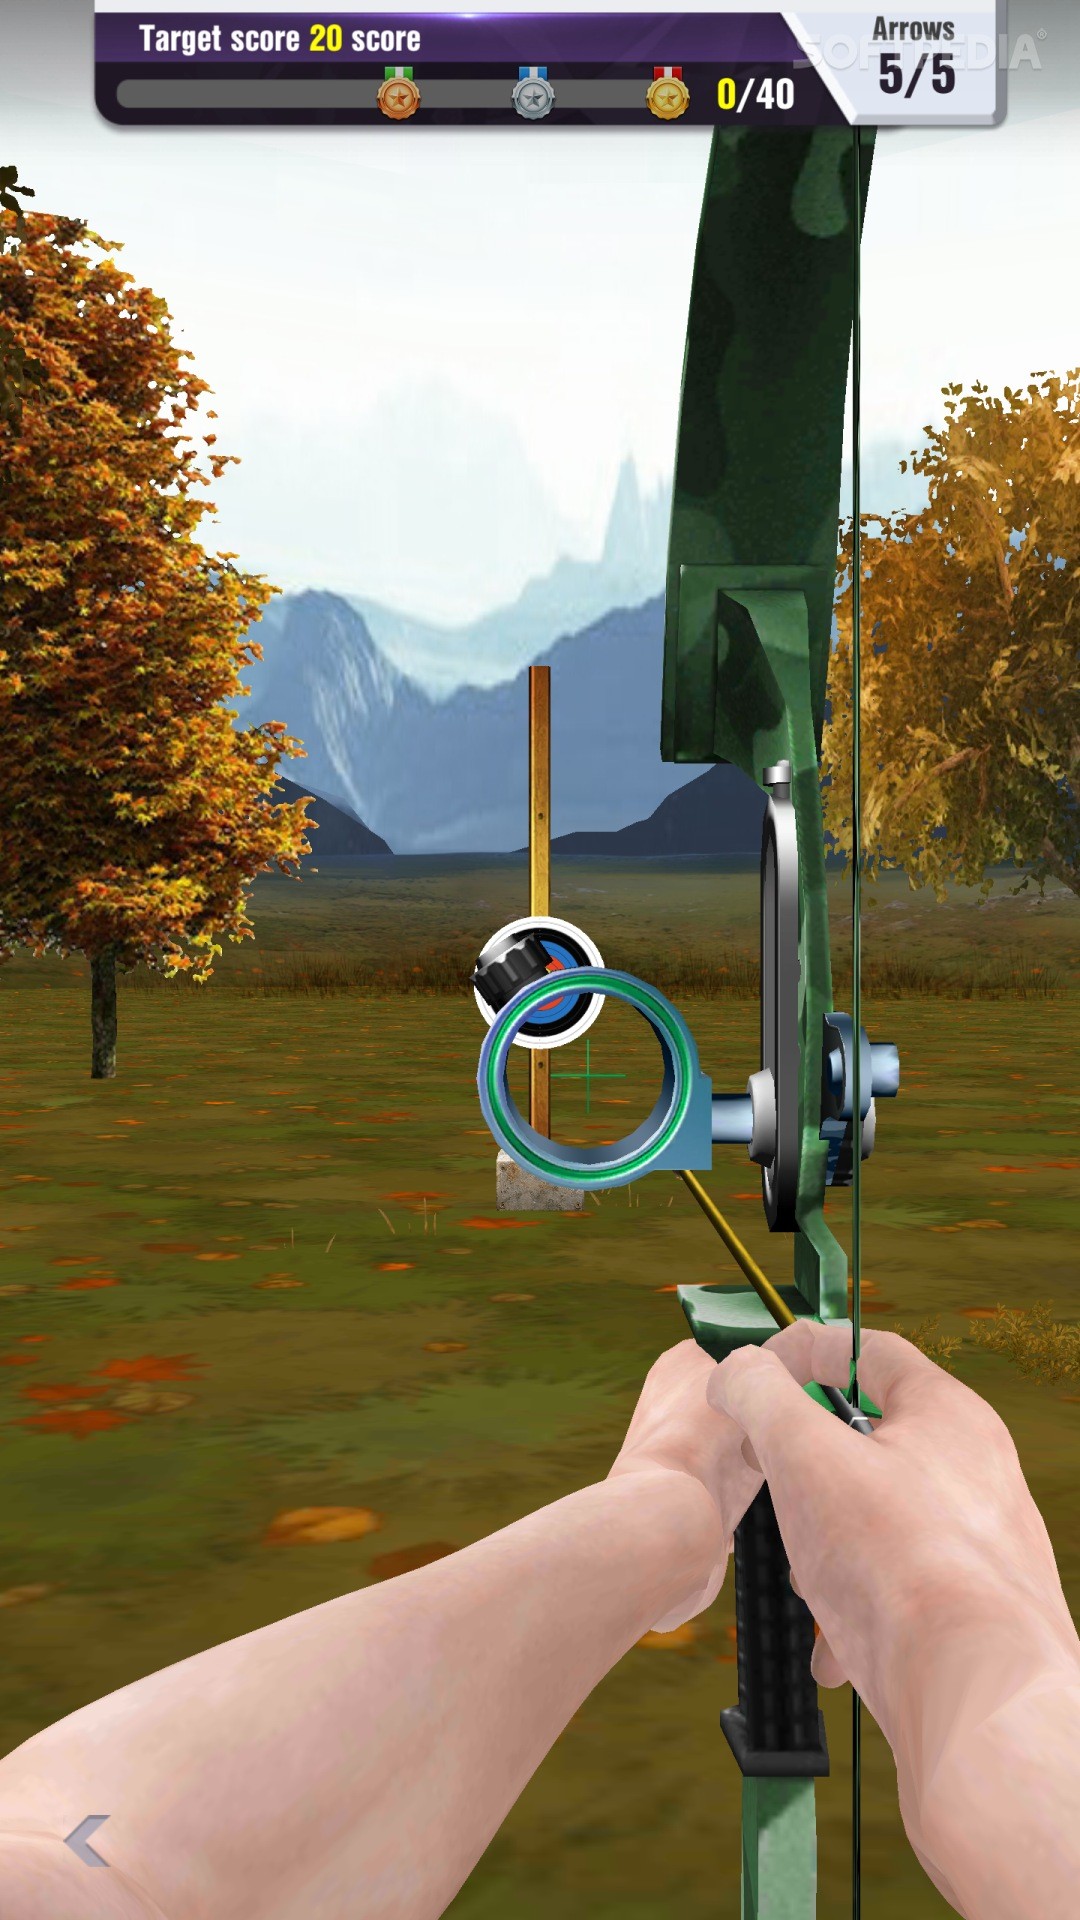 download Archery King - CTL MStore